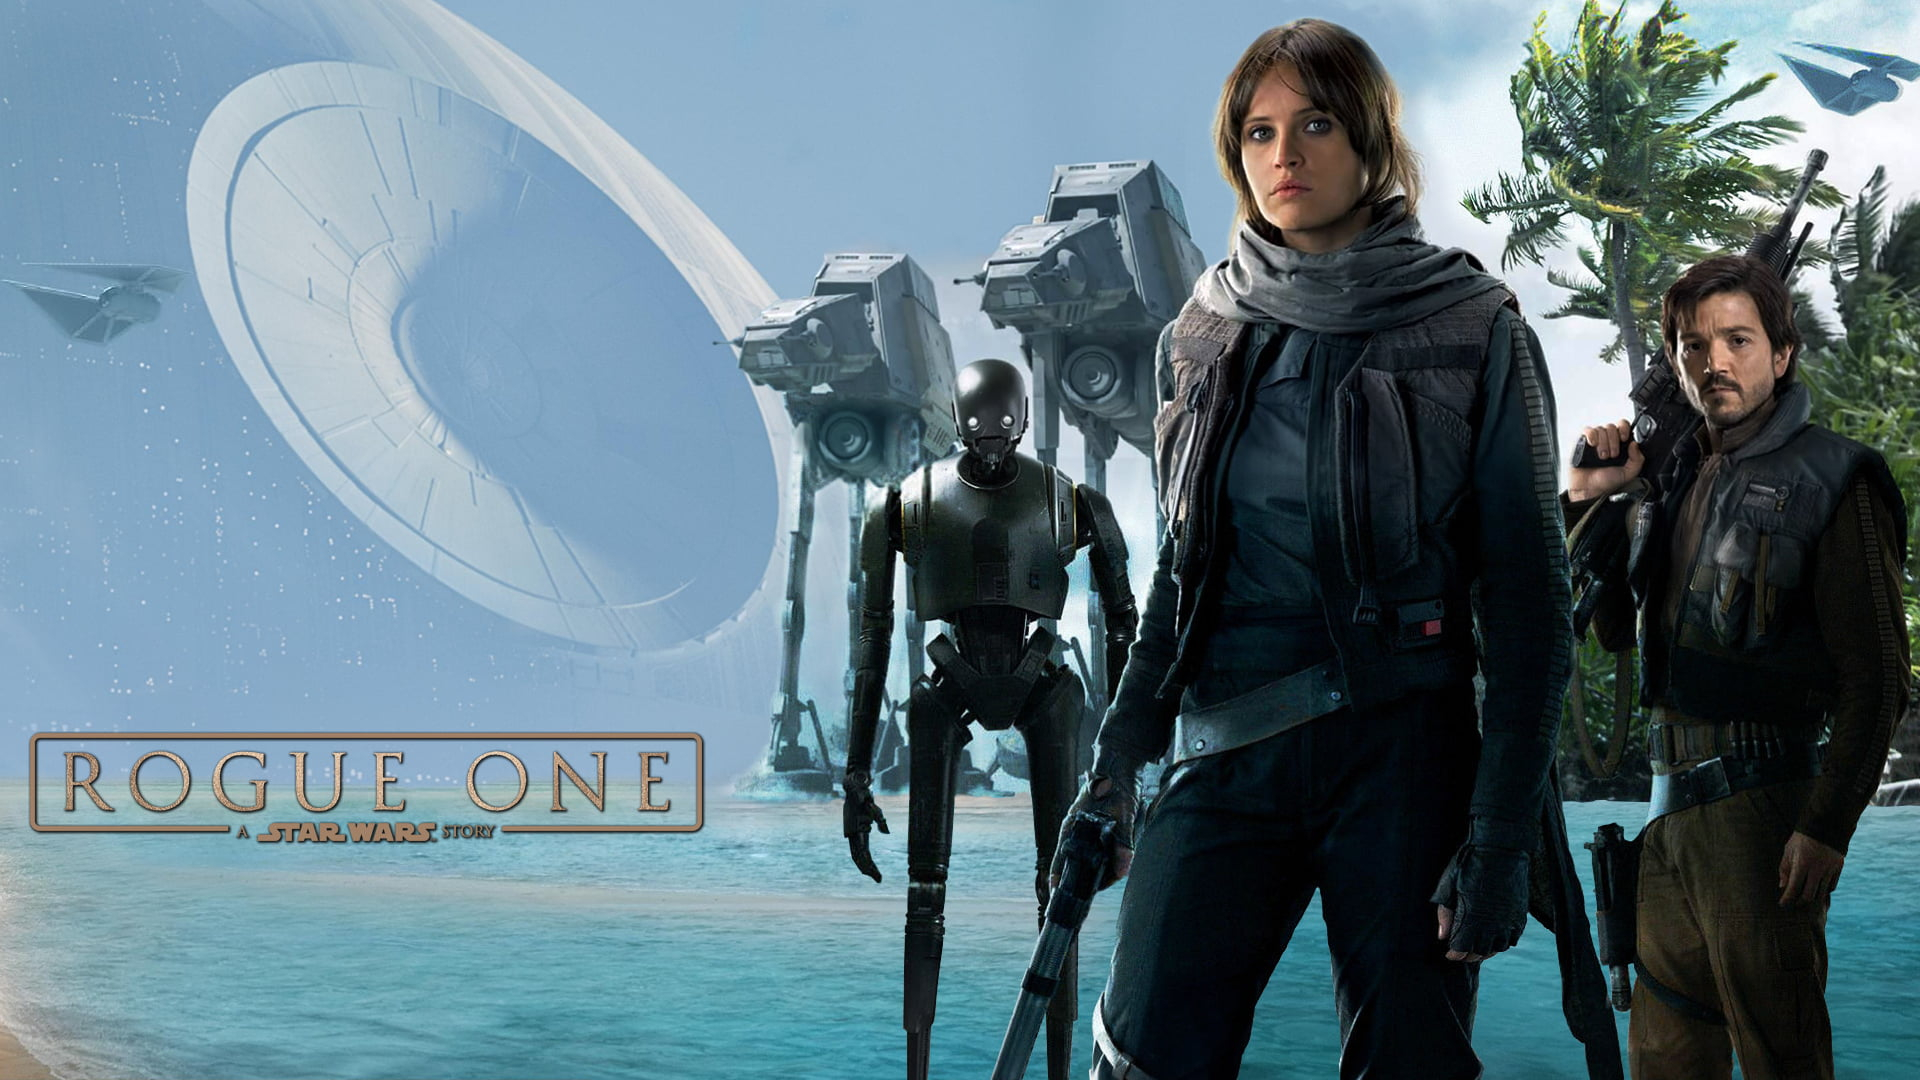 1920x1080 Star Wars Rogue One poster, Rogue One: A Star Wars Story, movies, Jyn Erso, Rebel Alliance HD wallpaper